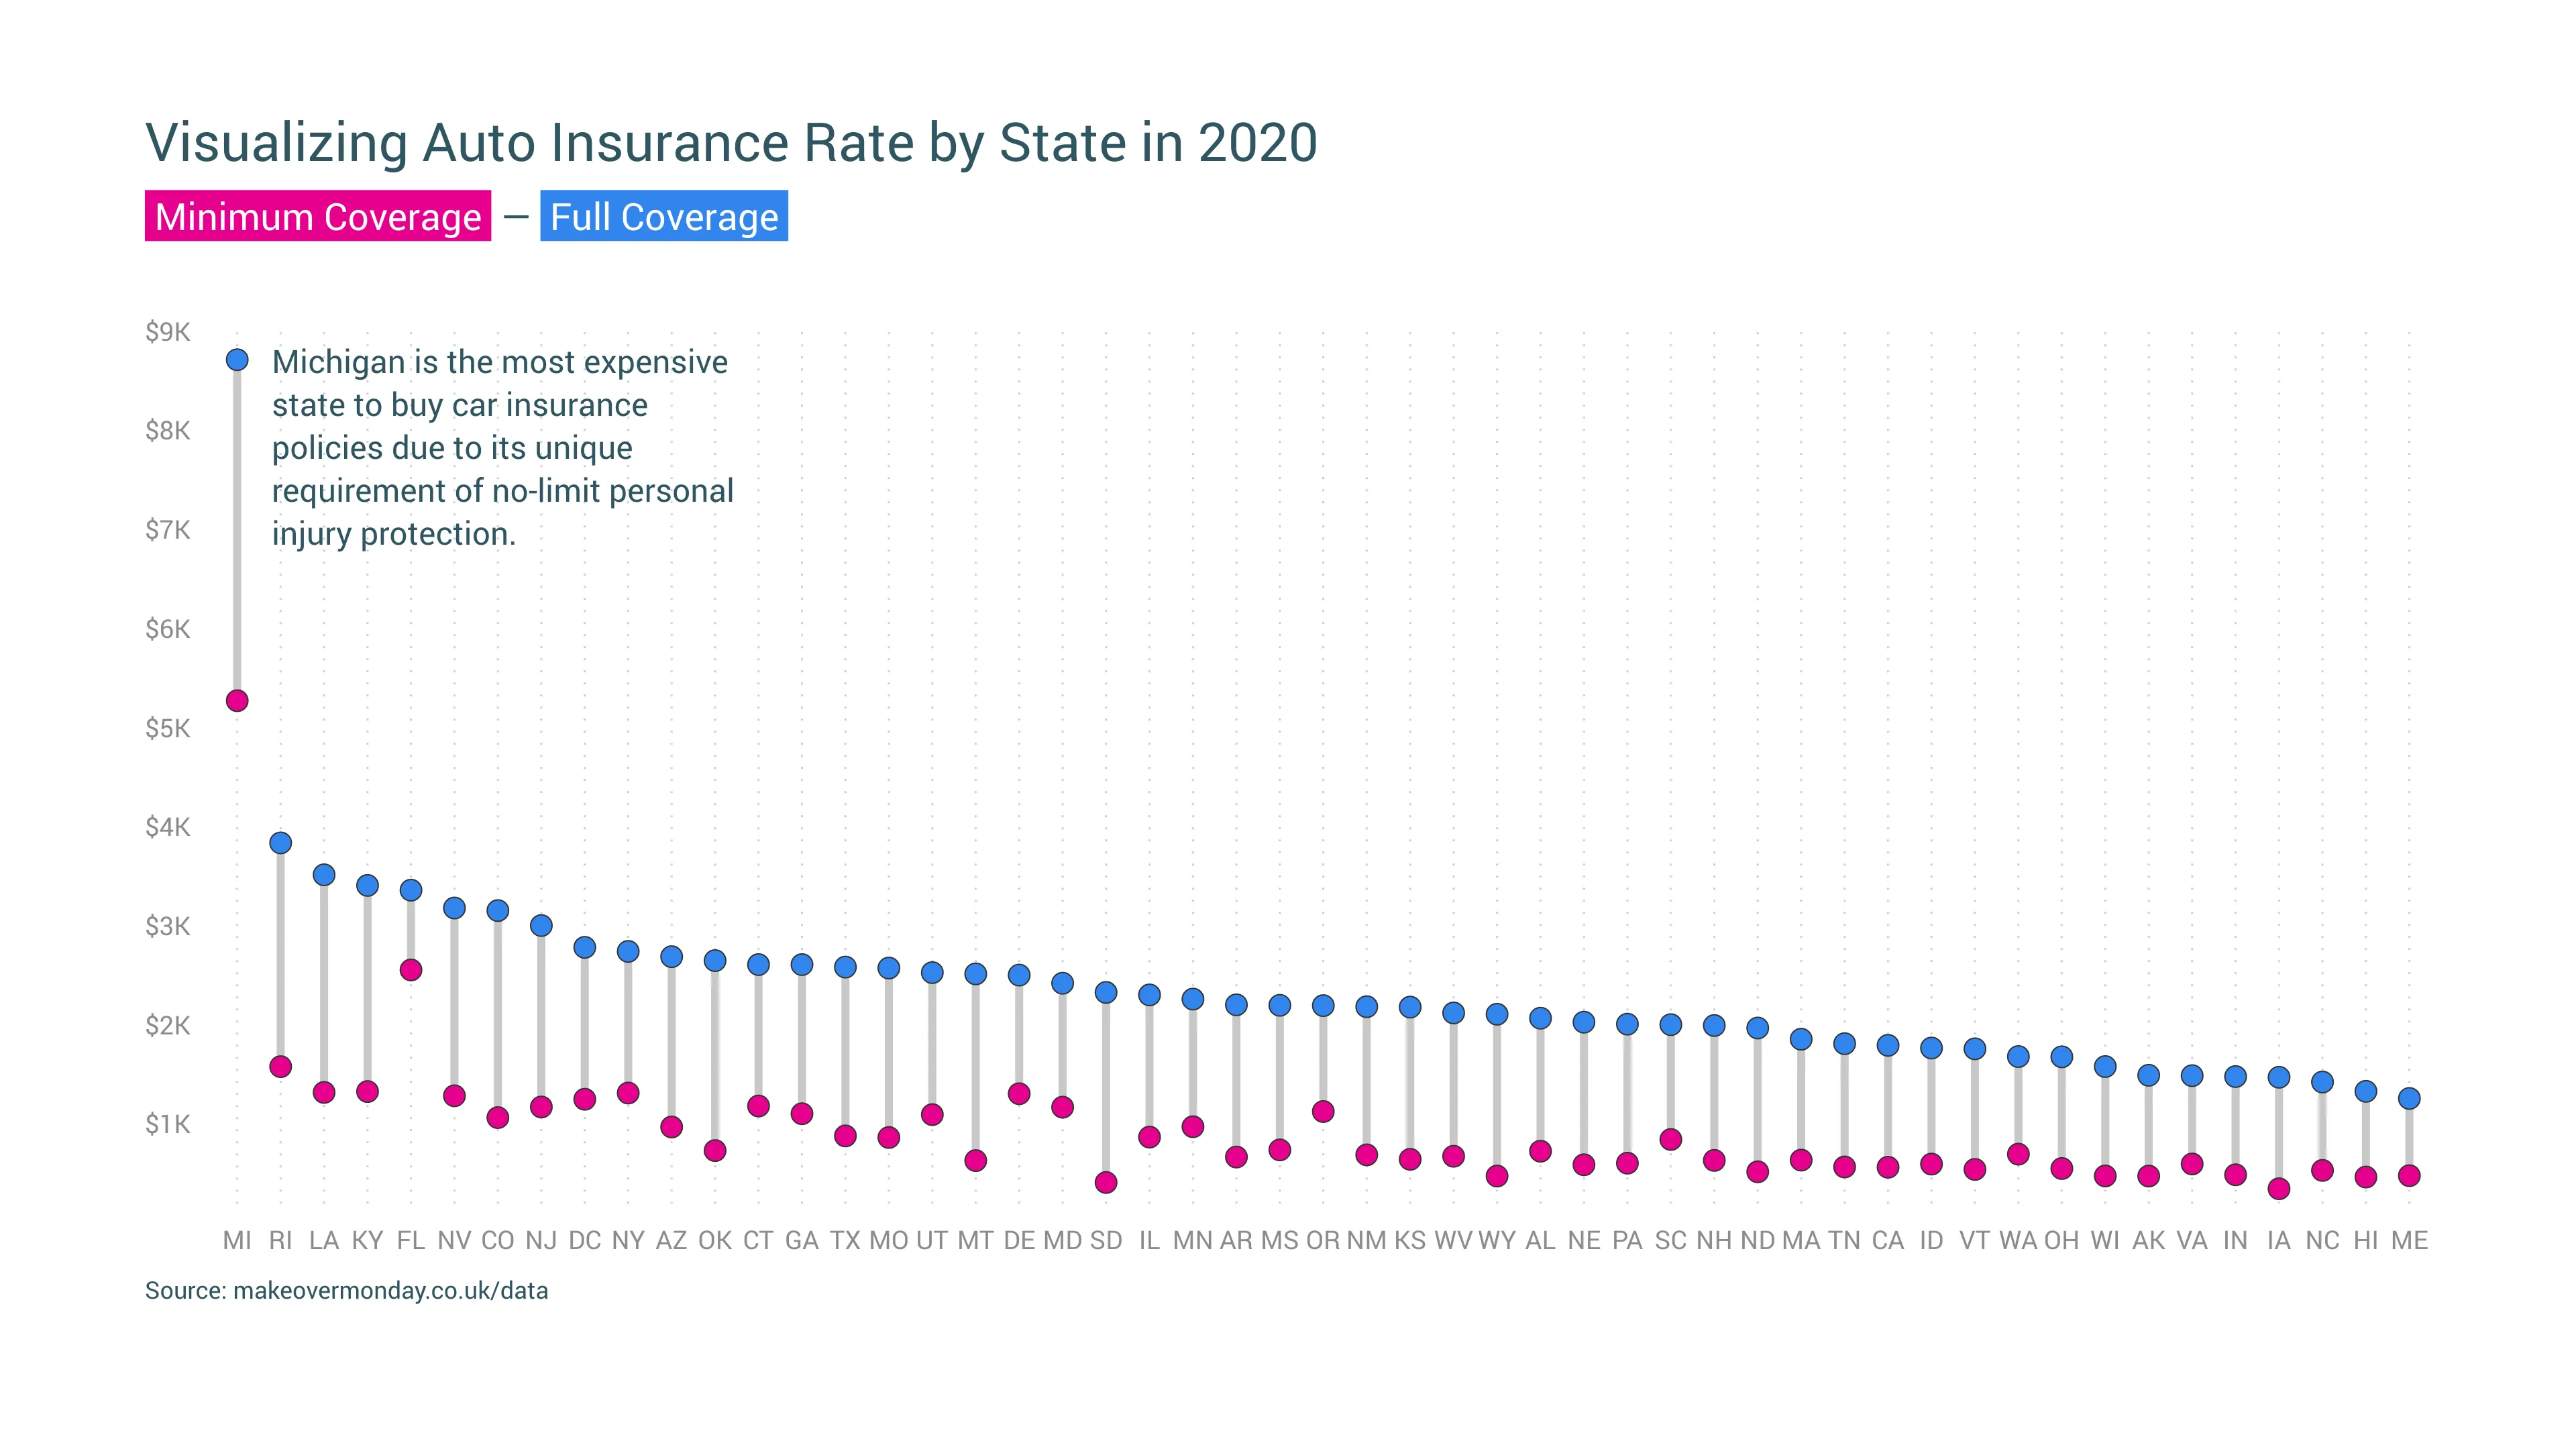 Visualizing Auto Insurance Rate by State in 2020